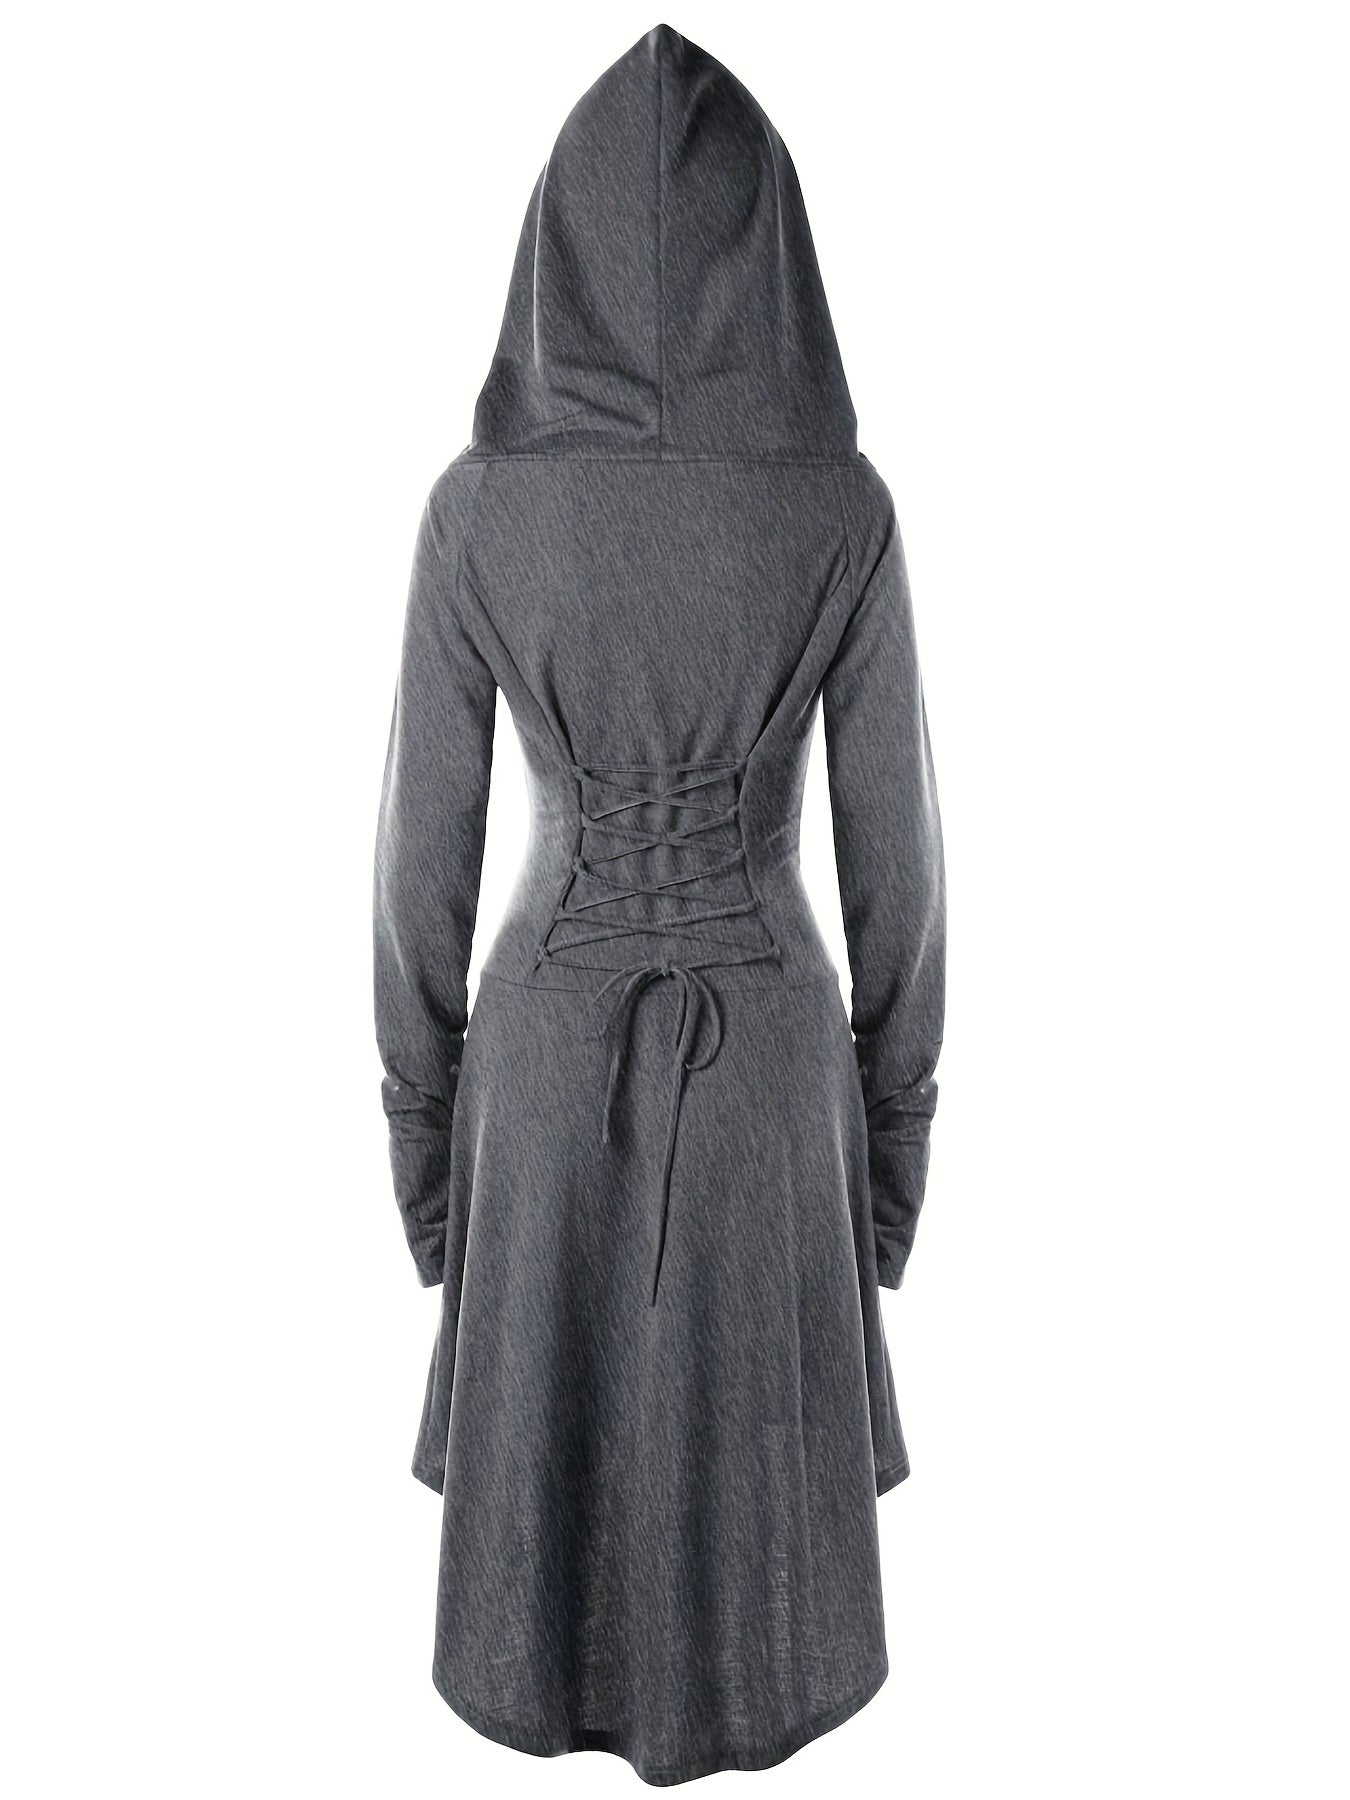 Gothic Hooded Cosplay Dress, Long Sleeve Dress For Halloween, Party, Performance, Women's Clothing